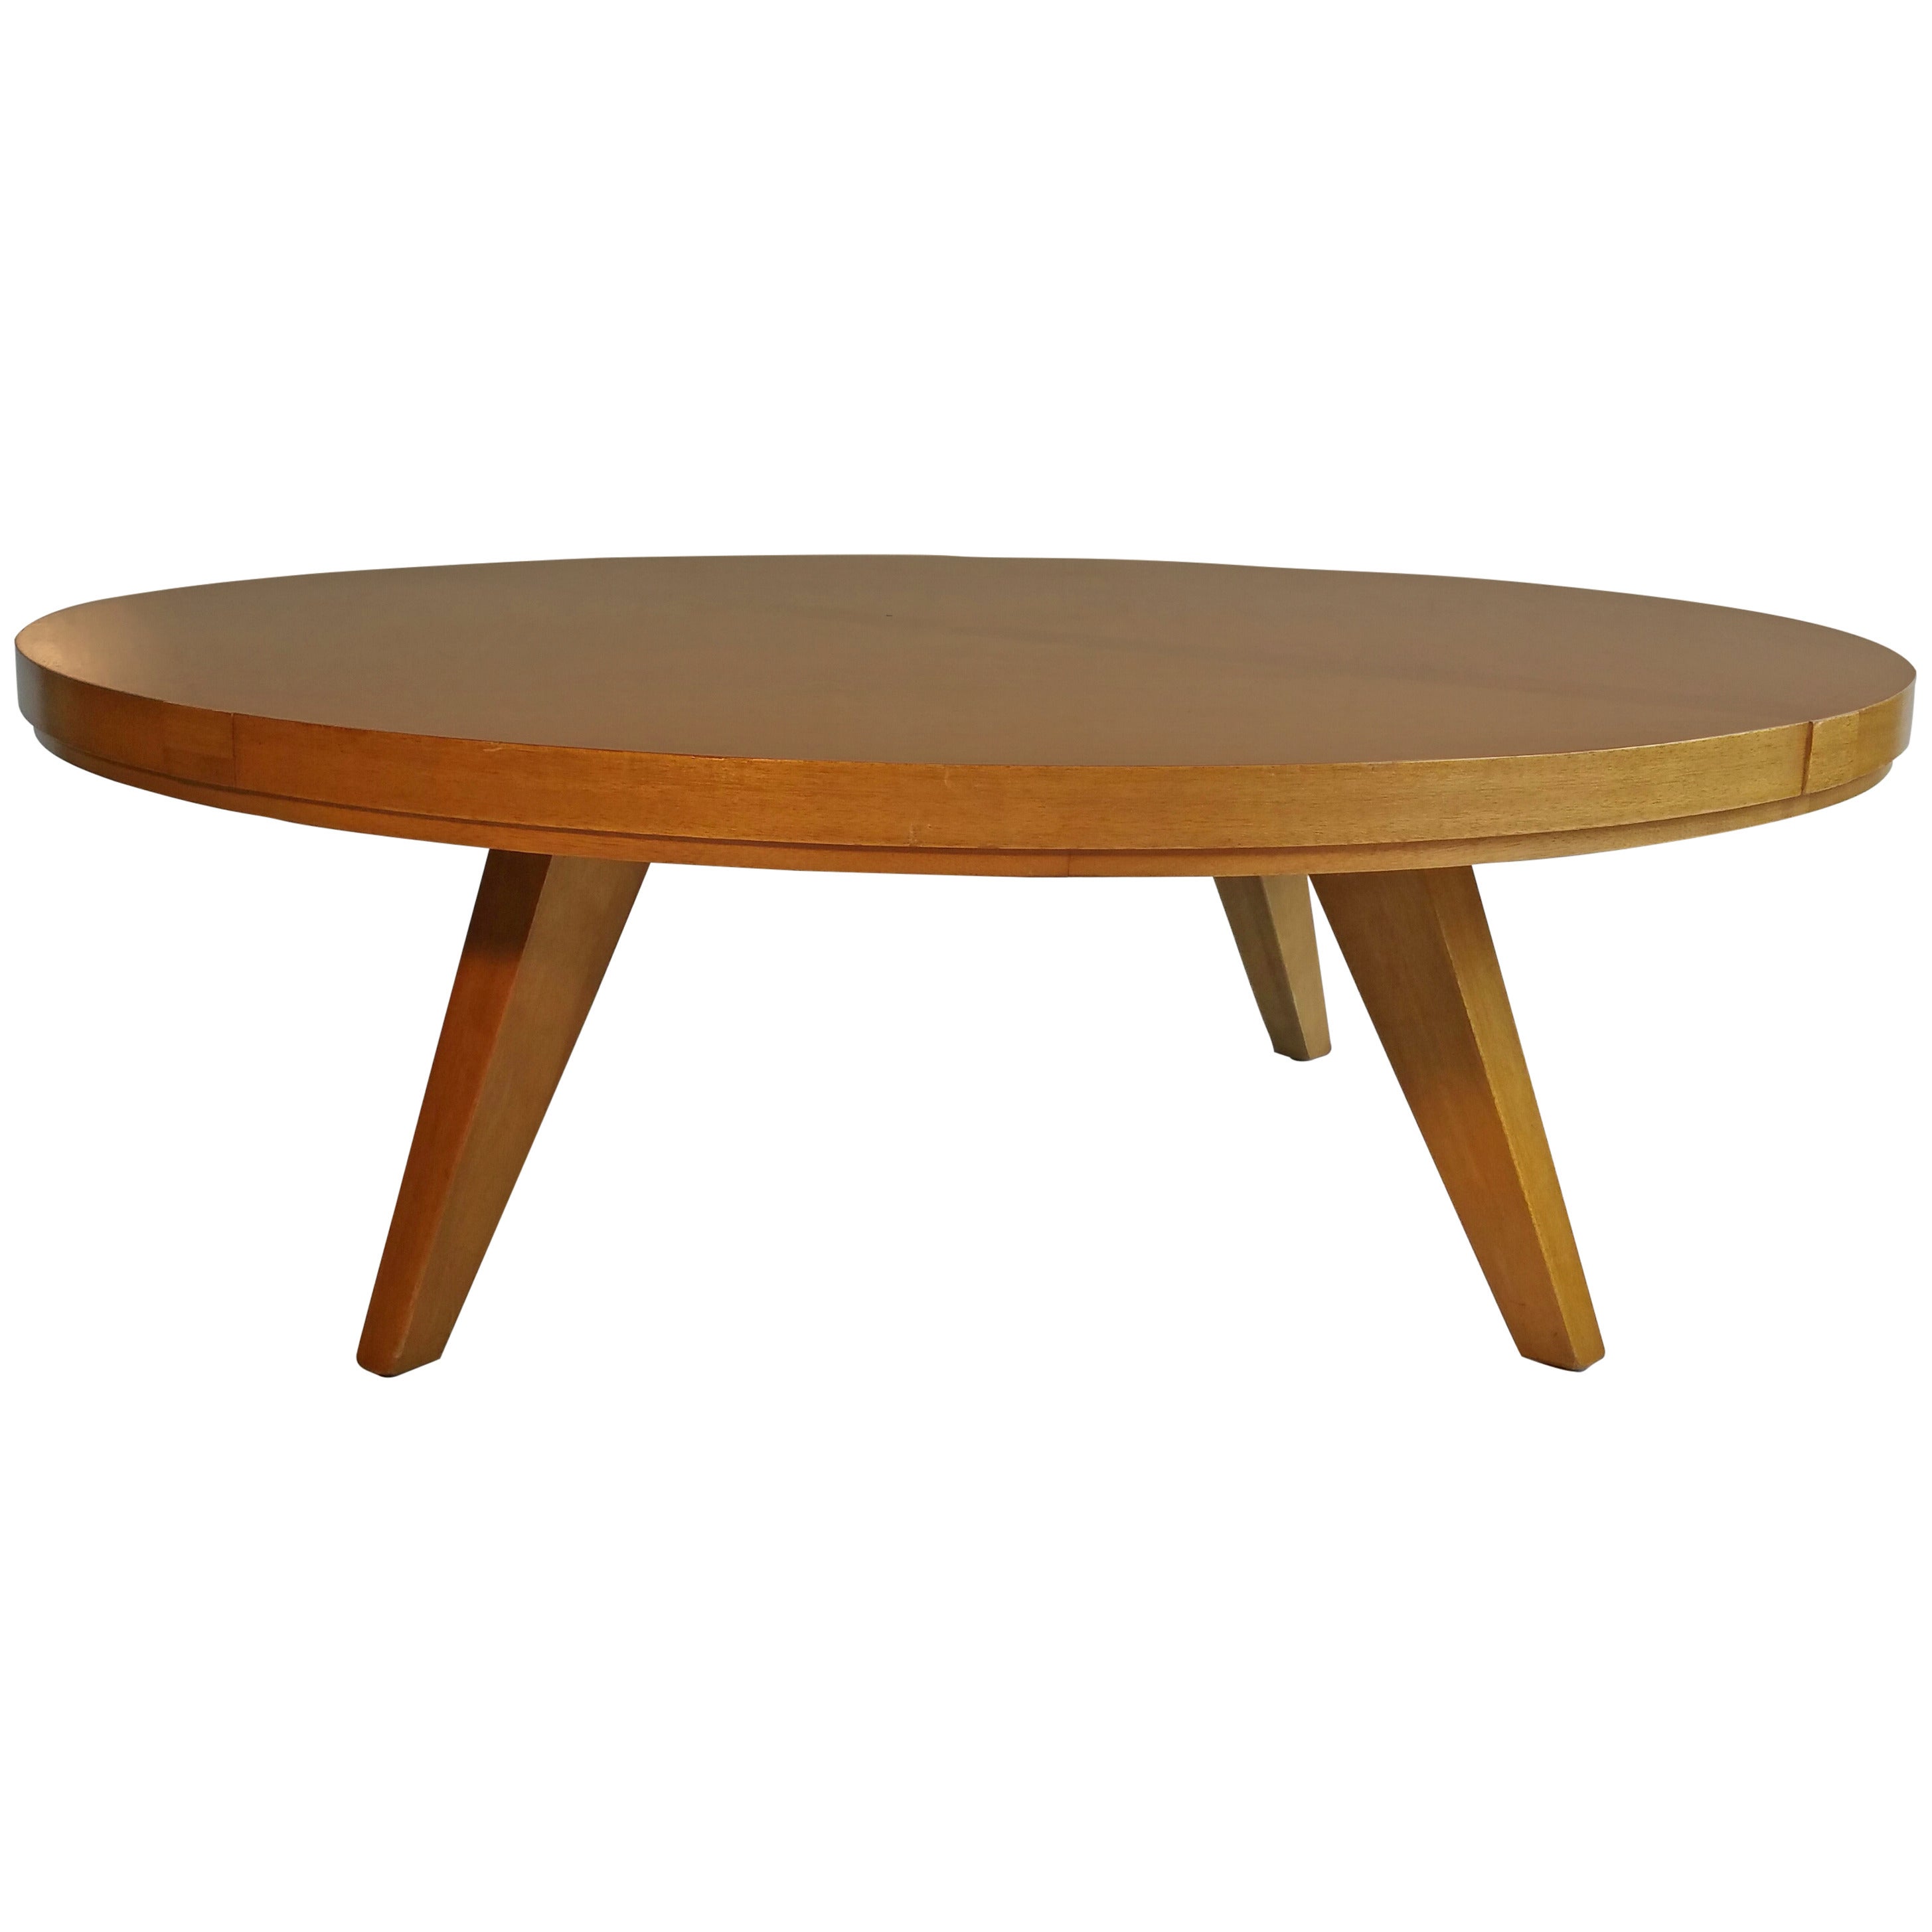 Classic Mid-Century Modern Coffee Table, Red Lion, Architecturally Designed